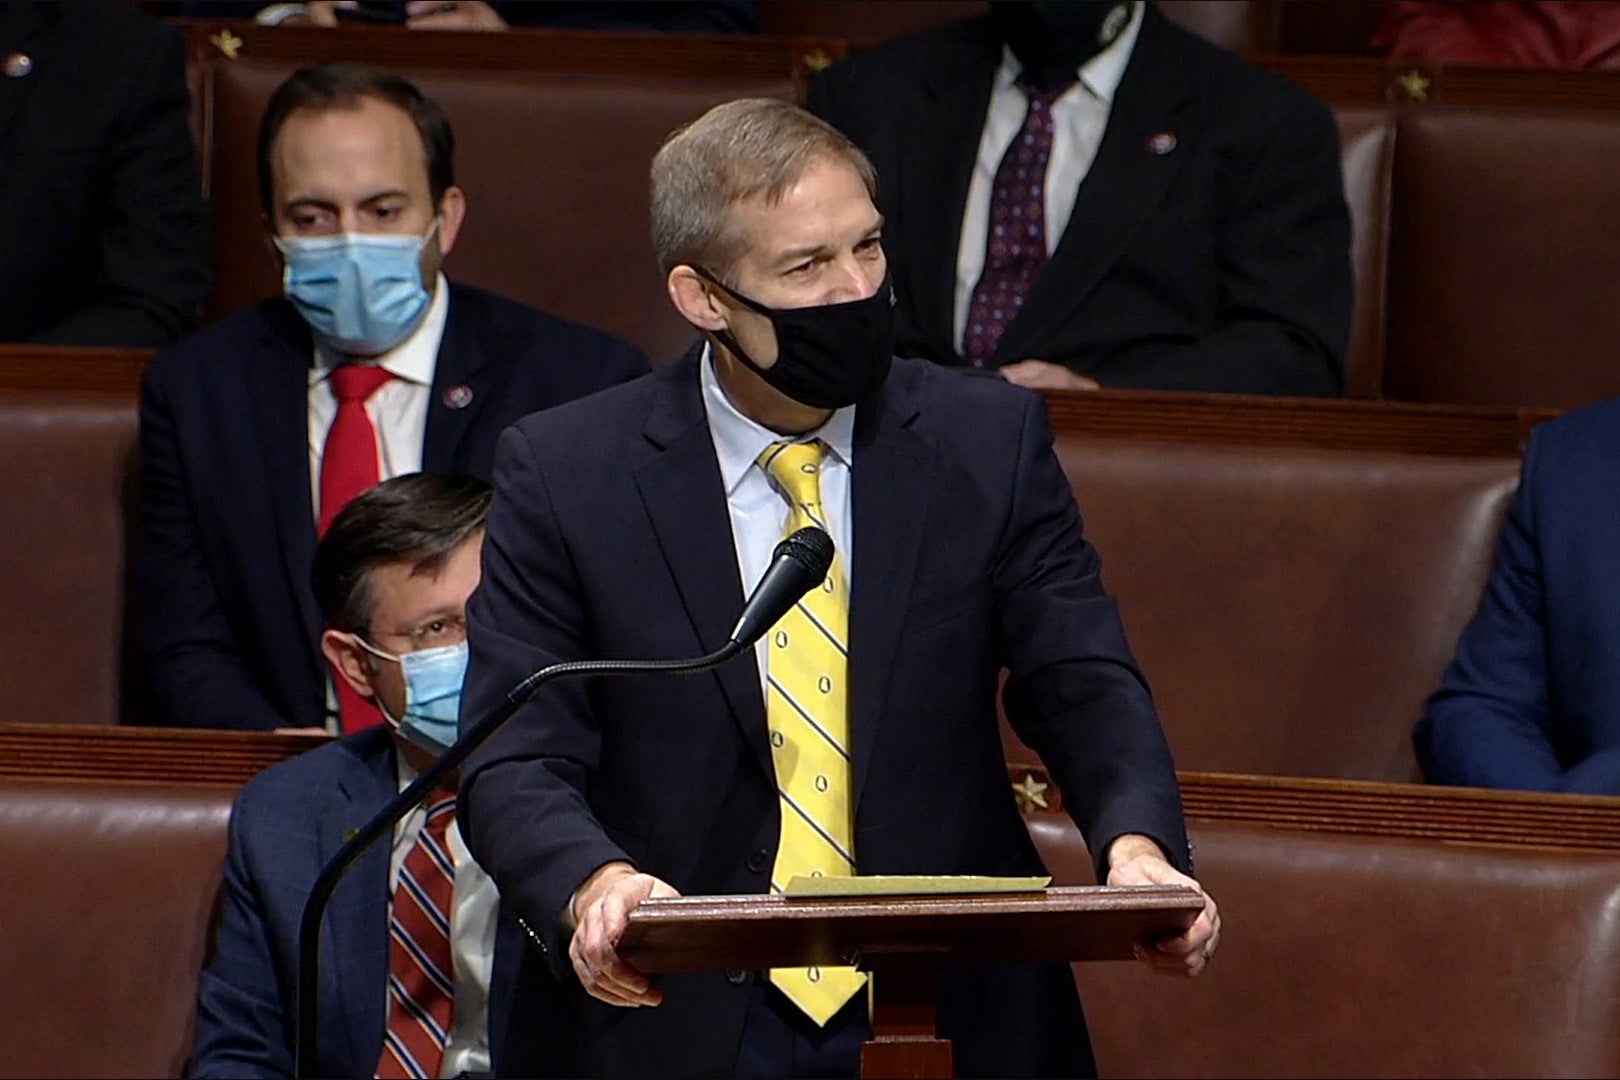 Jim Jordan defended Donald Trump during a House debate on impeachment